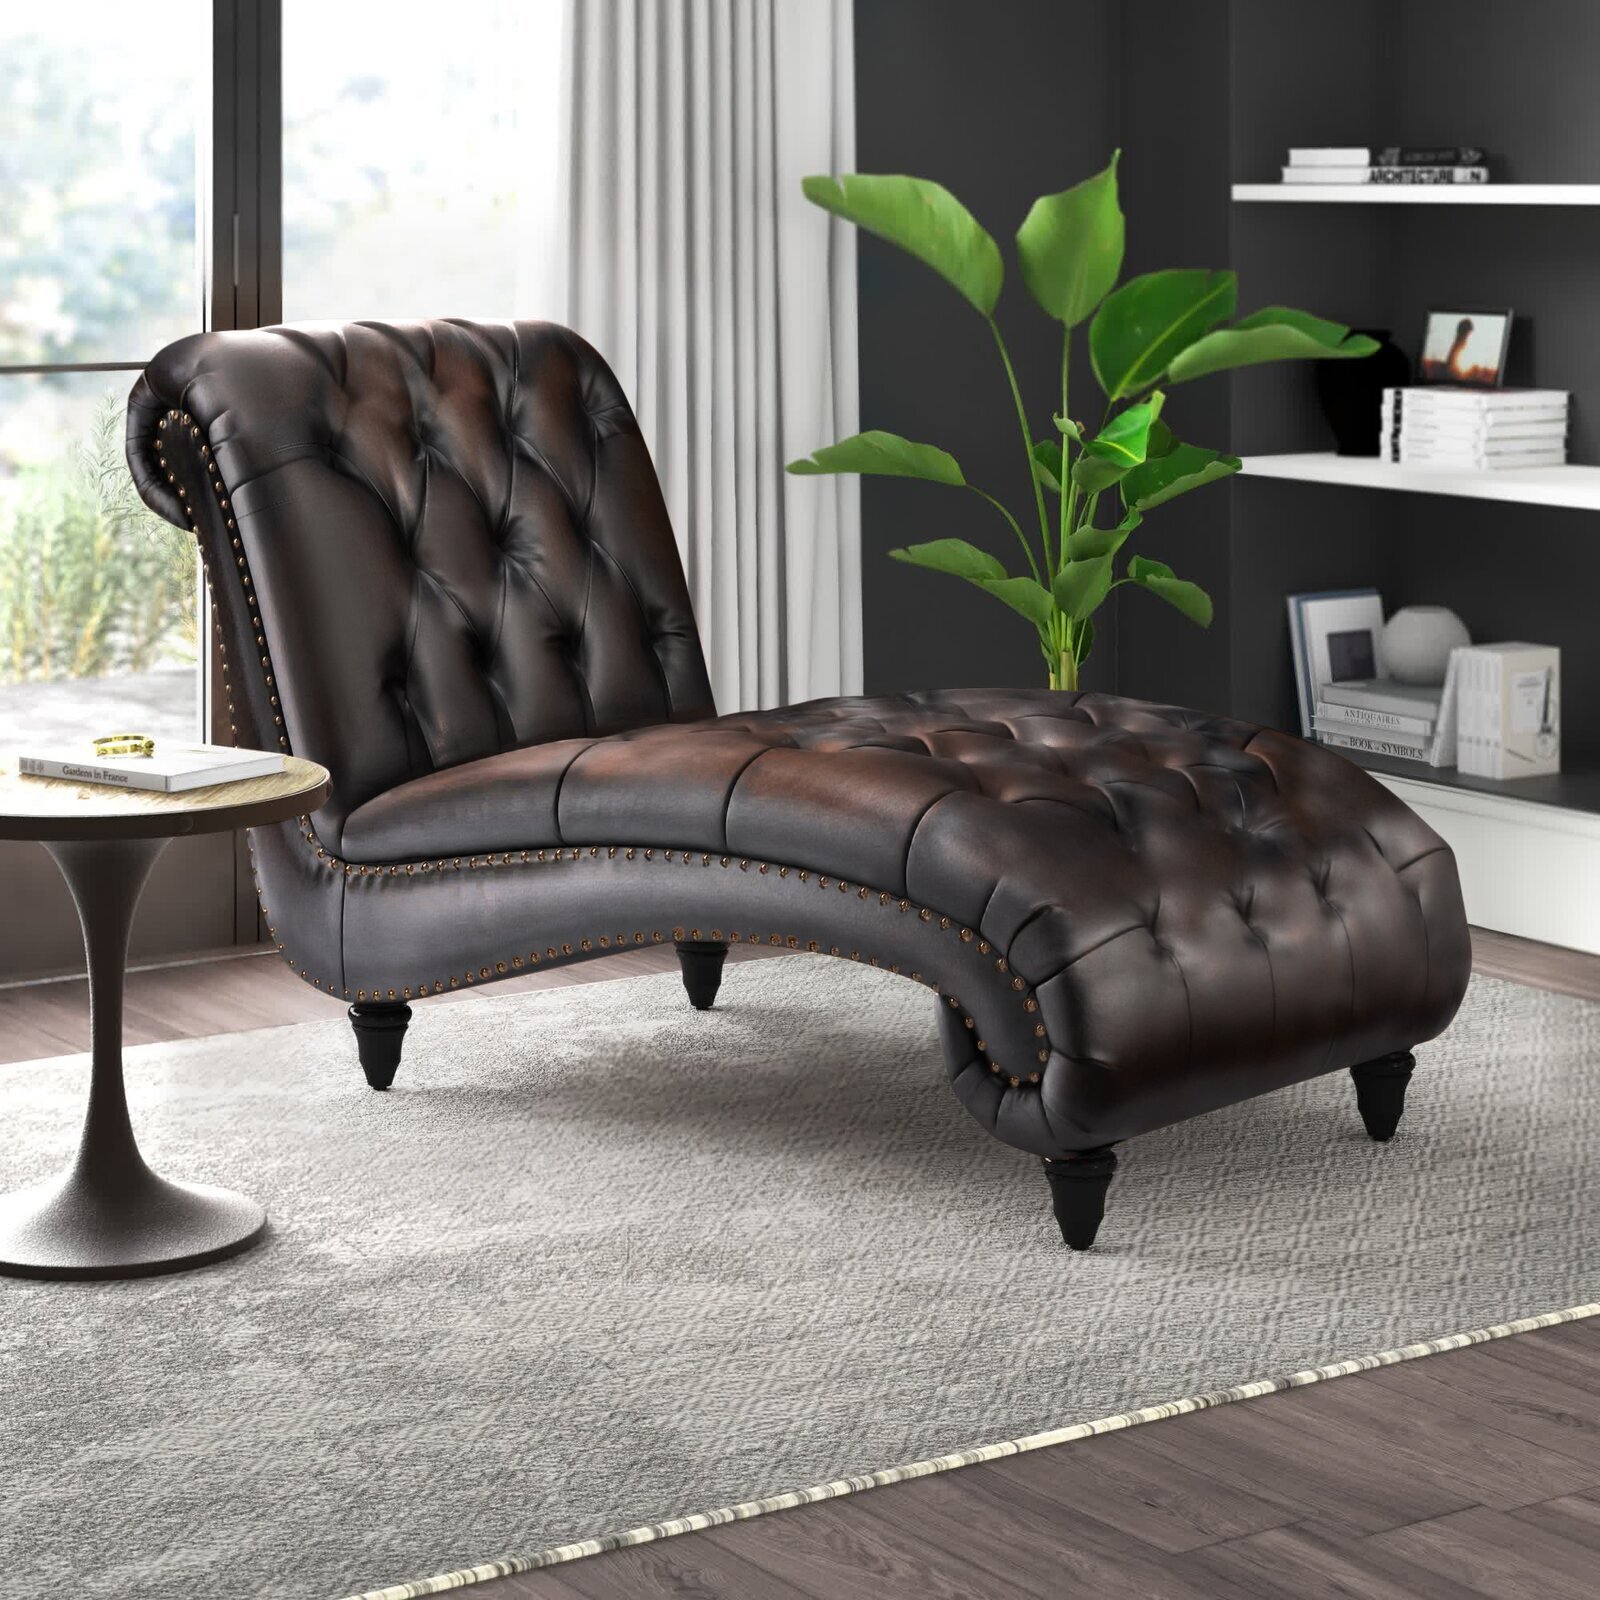 Tufted Bonded Leather Bedroom Chaise Lounge